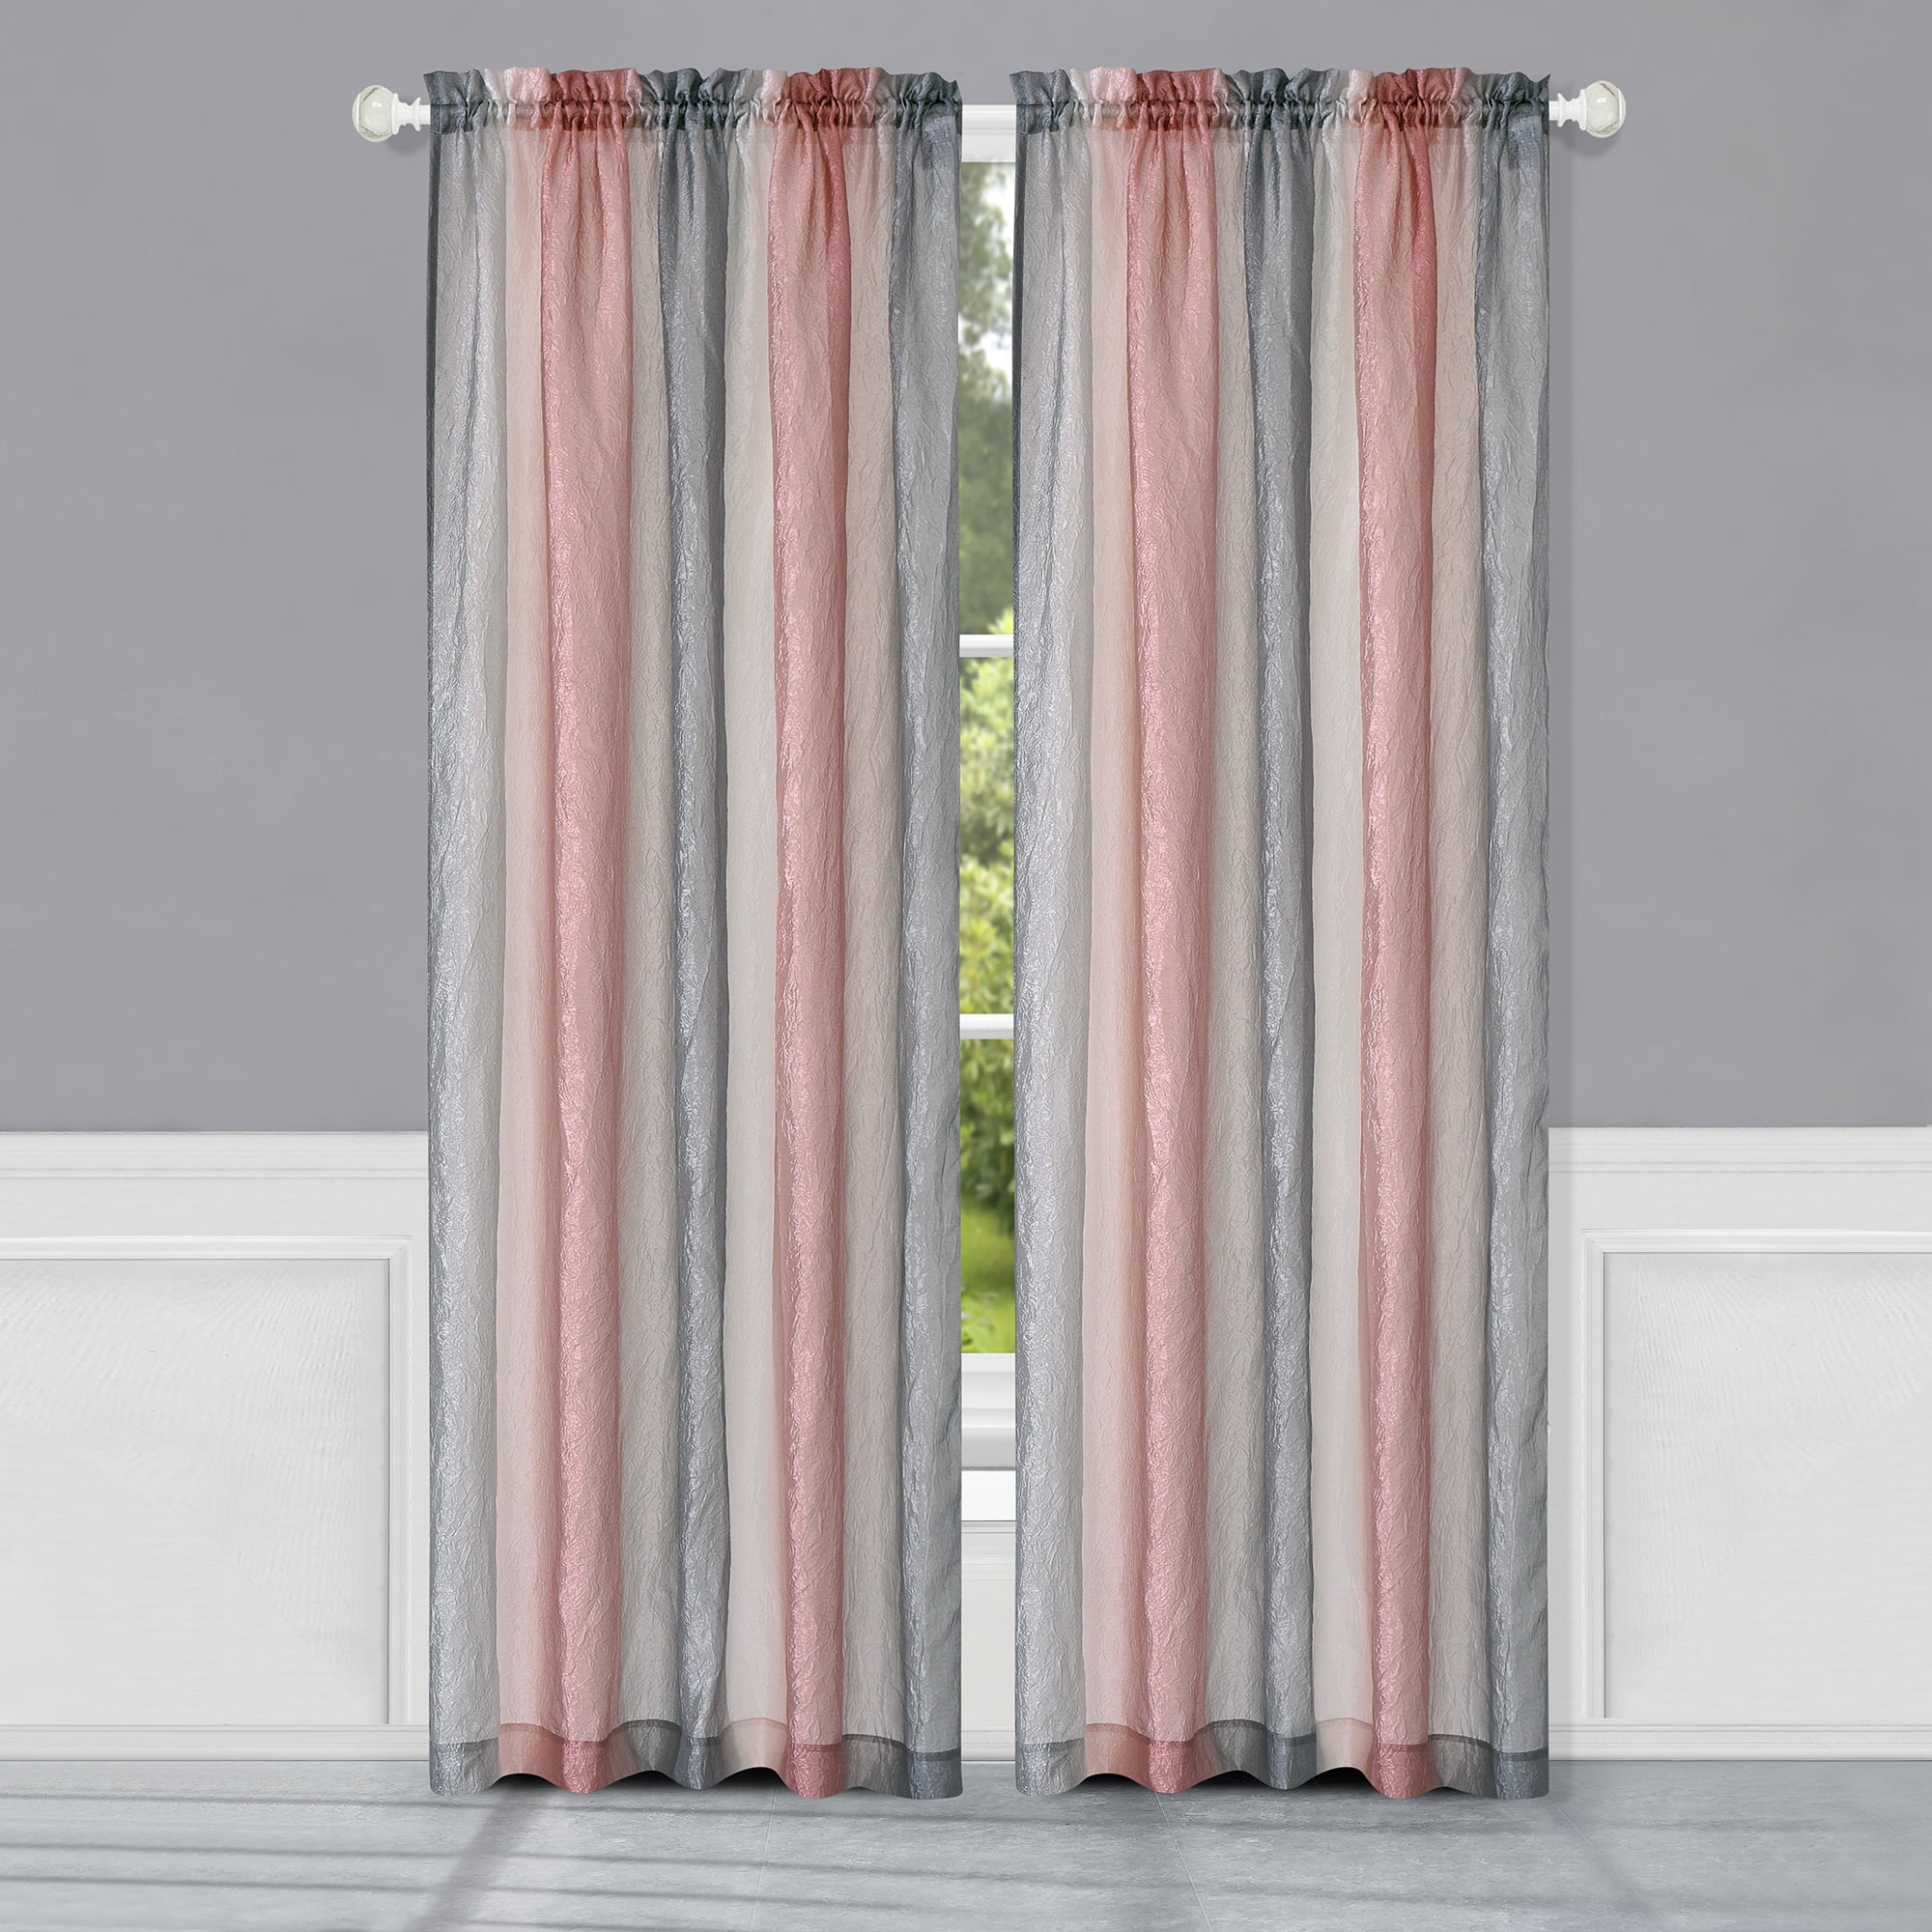 Details about   White Sheer Curtains Living Room Voile Pinch Pleated Window Treatments Drapes 